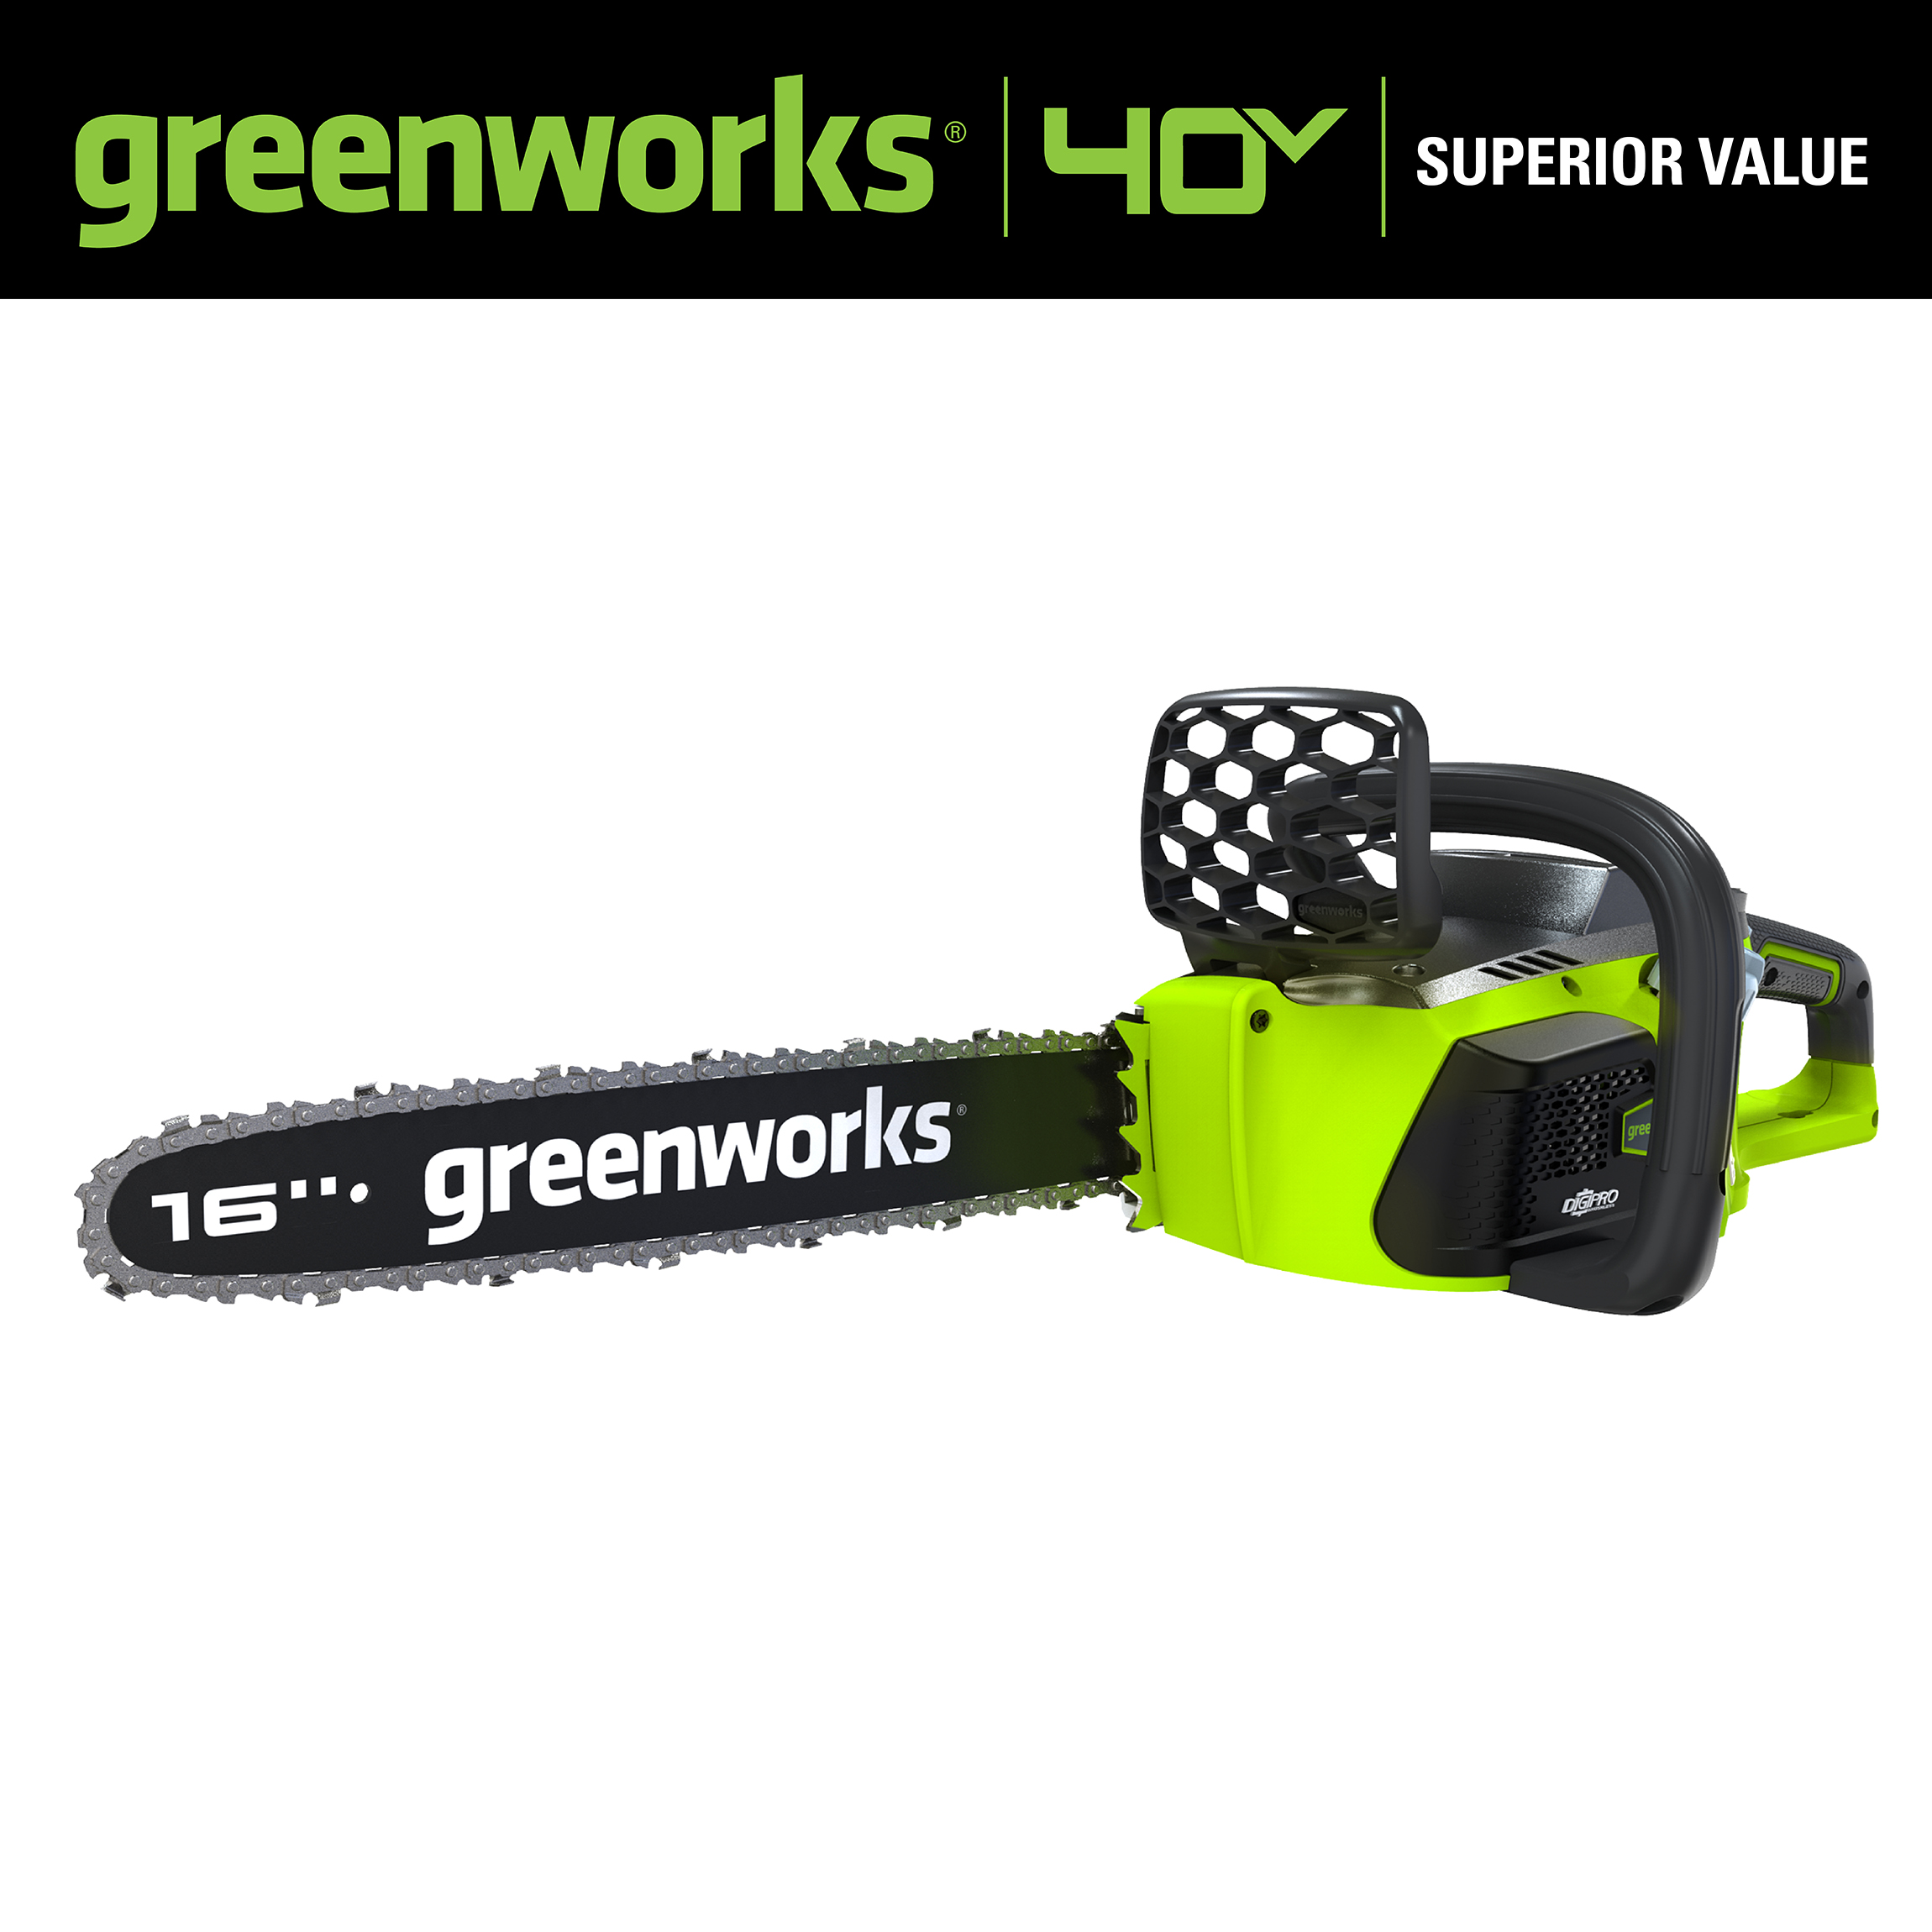 Greenworks GMax 40V 16 Inch Bar DigiPro Cordless Chainsaw (Battery Not Included) - image 4 of 13